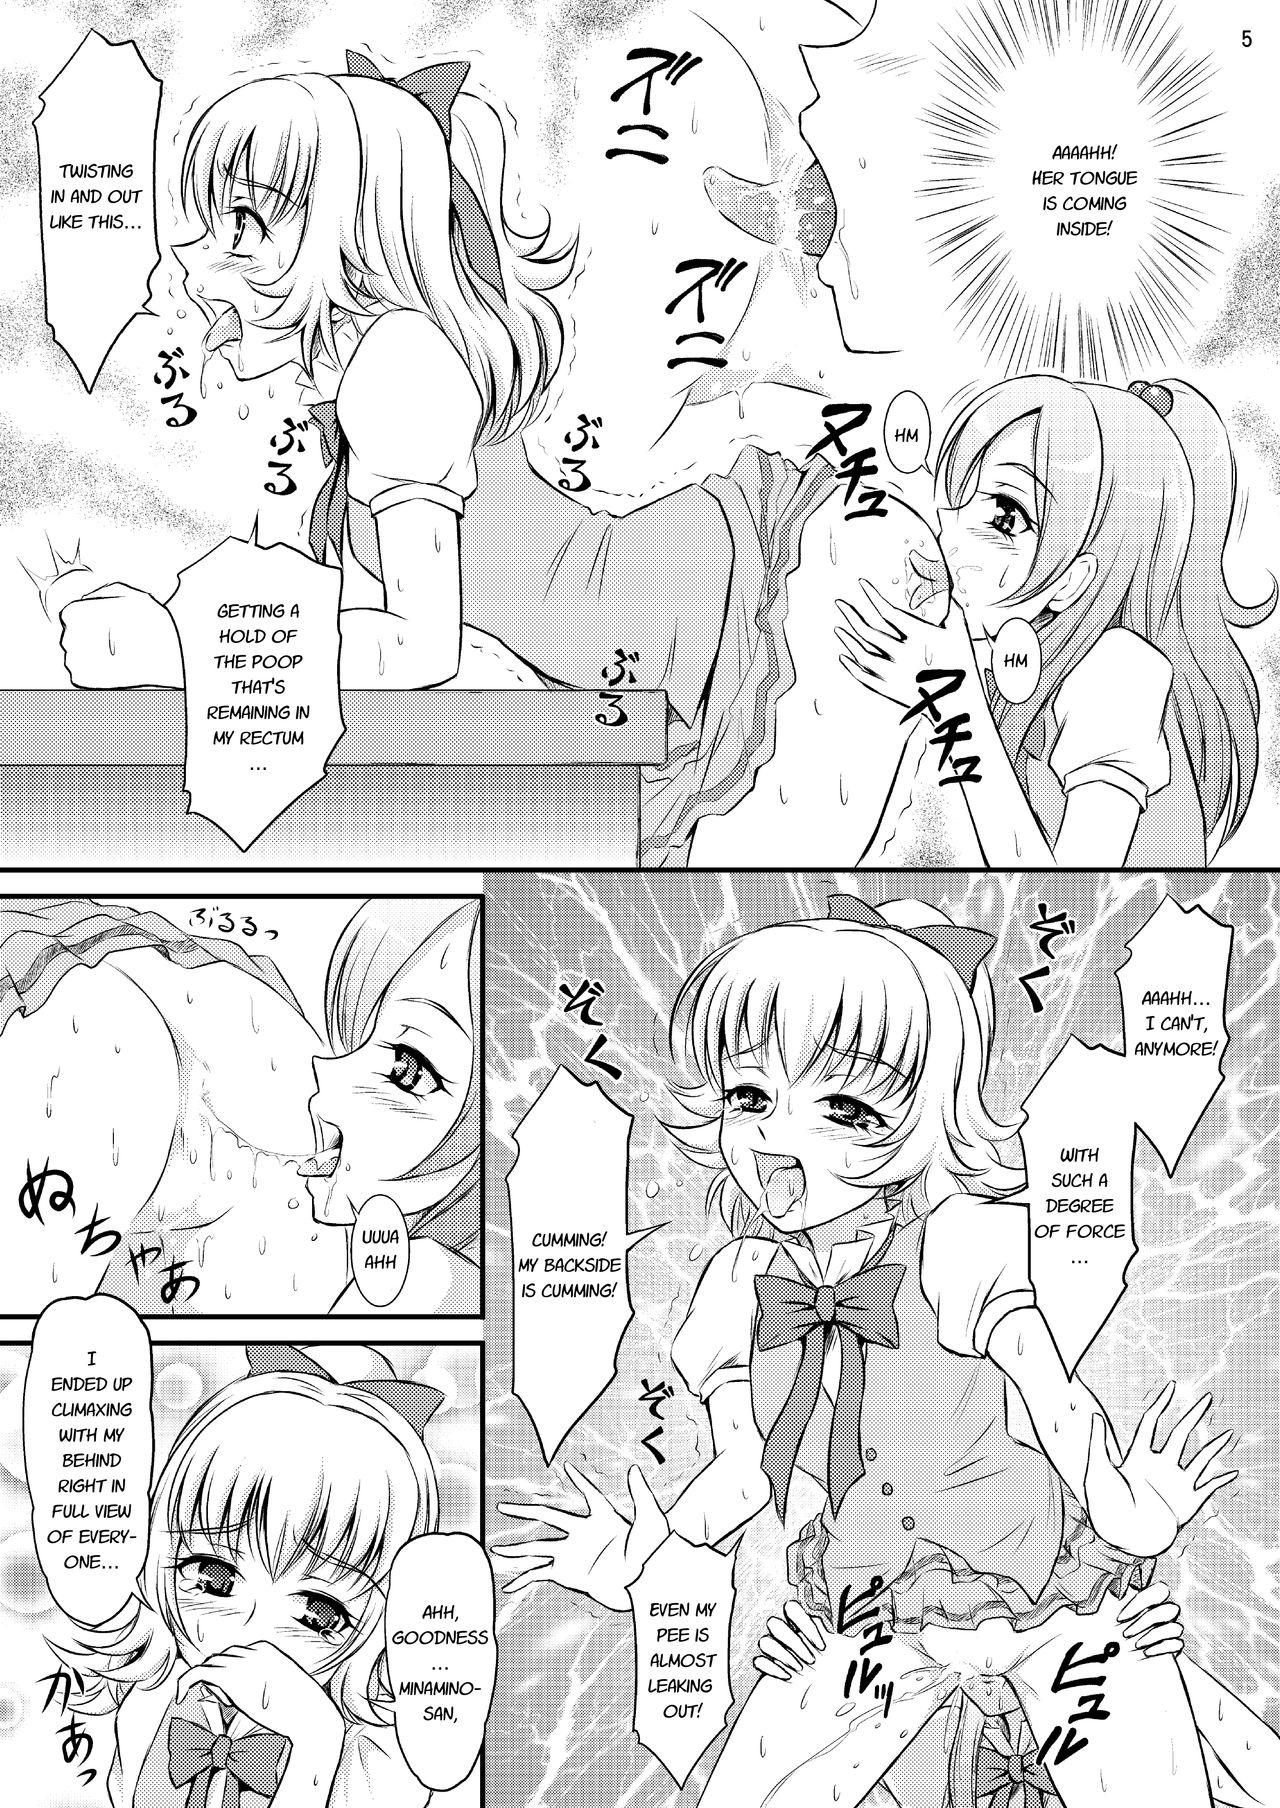 Pussy Sex Sweets' Hime no Himitsu Recipe - Suite precure Piss - Page 6